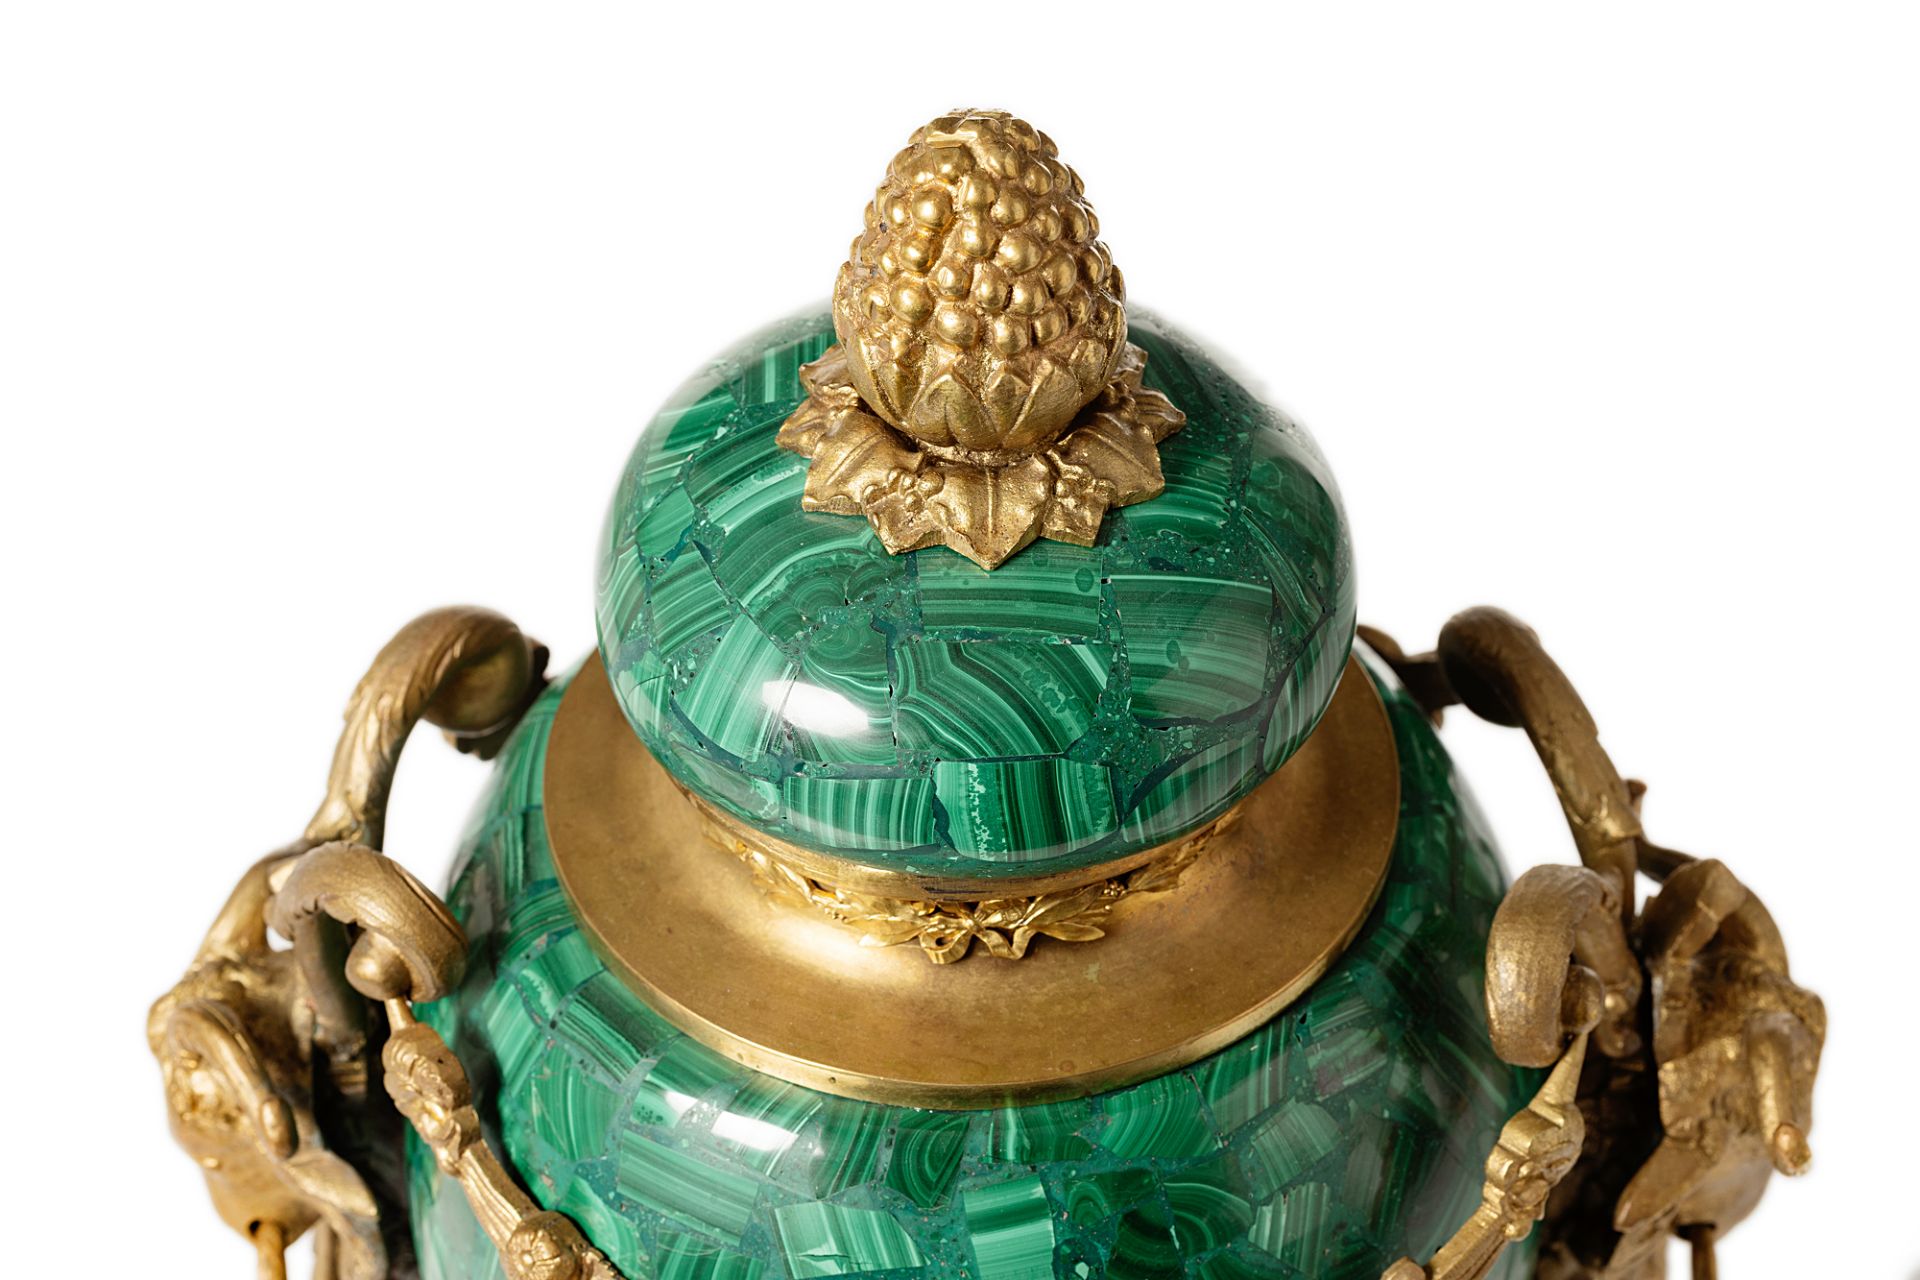 Pair of malachite vases in the style of French Early Classicism - Image 6 of 8